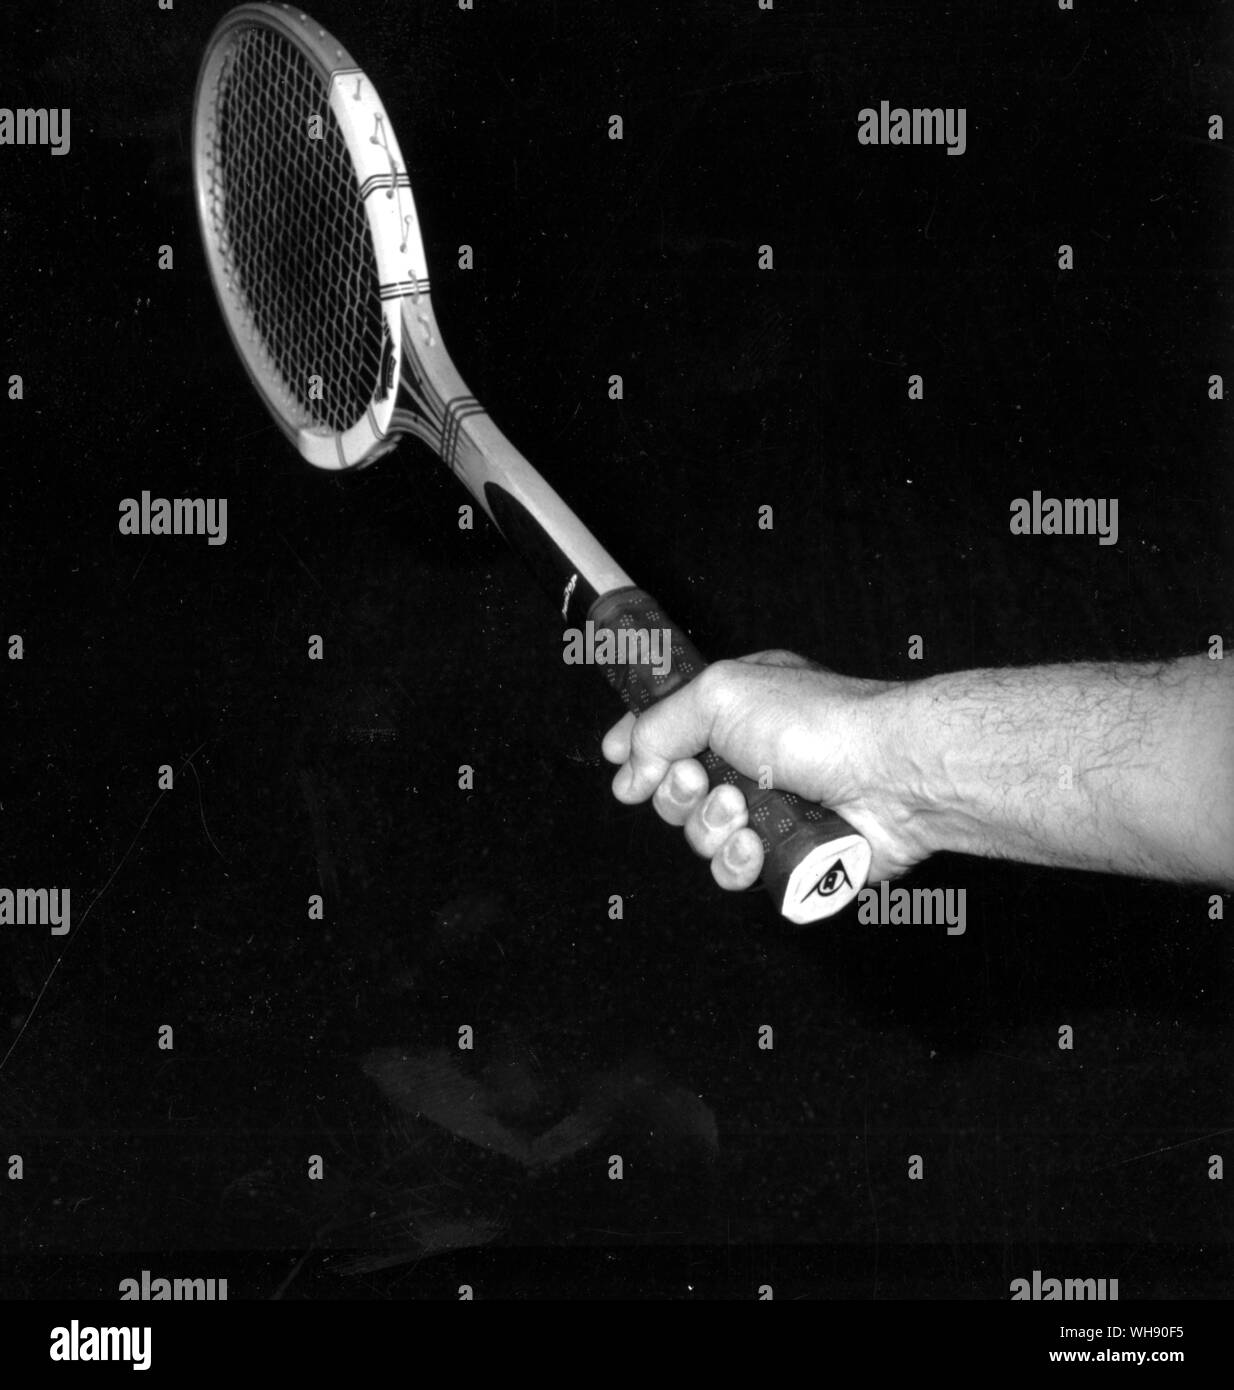 The eastern forehand grip 'shake hands' grip. The forefinger is spread slightly. Before the fingers close, the palm is parallel  with the racket face. Stock Photo